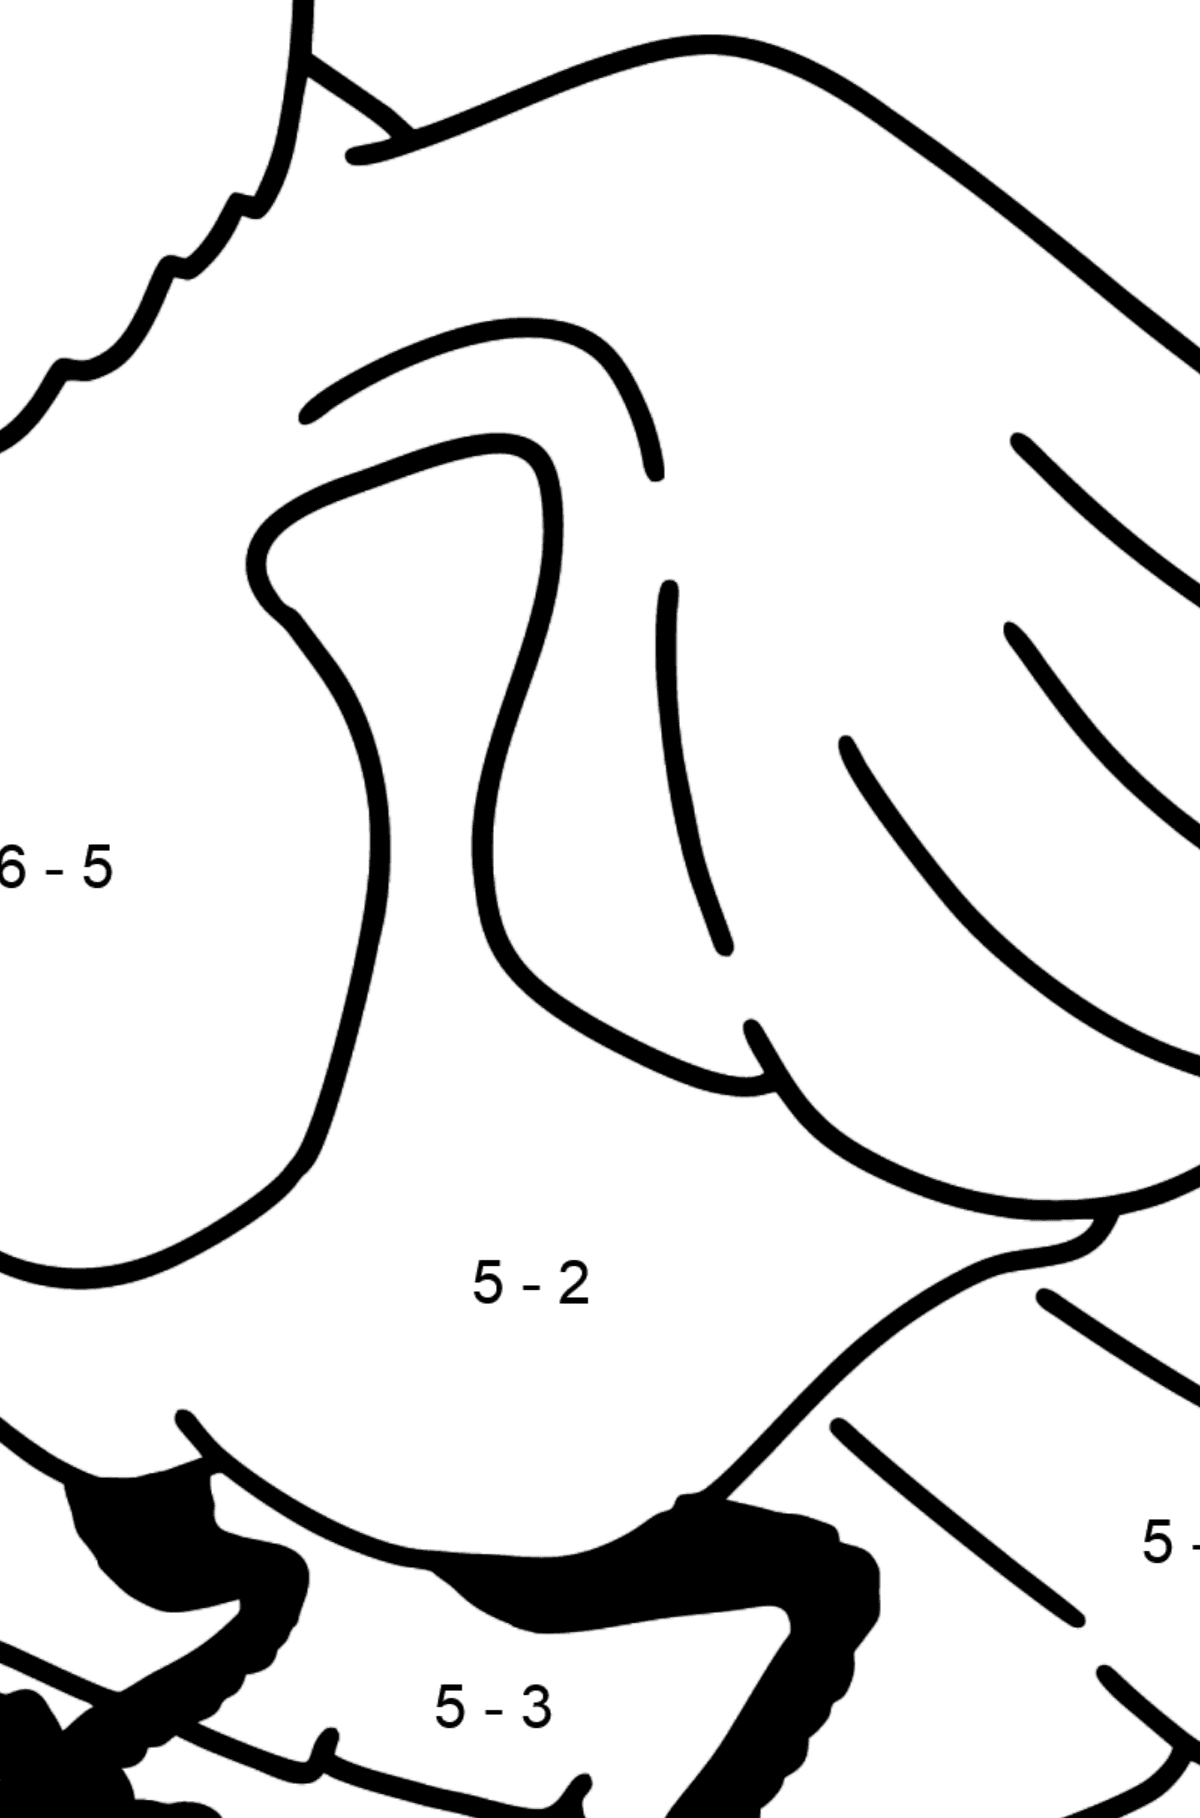 Dove coloring page - Math Coloring - Subtraction for Kids